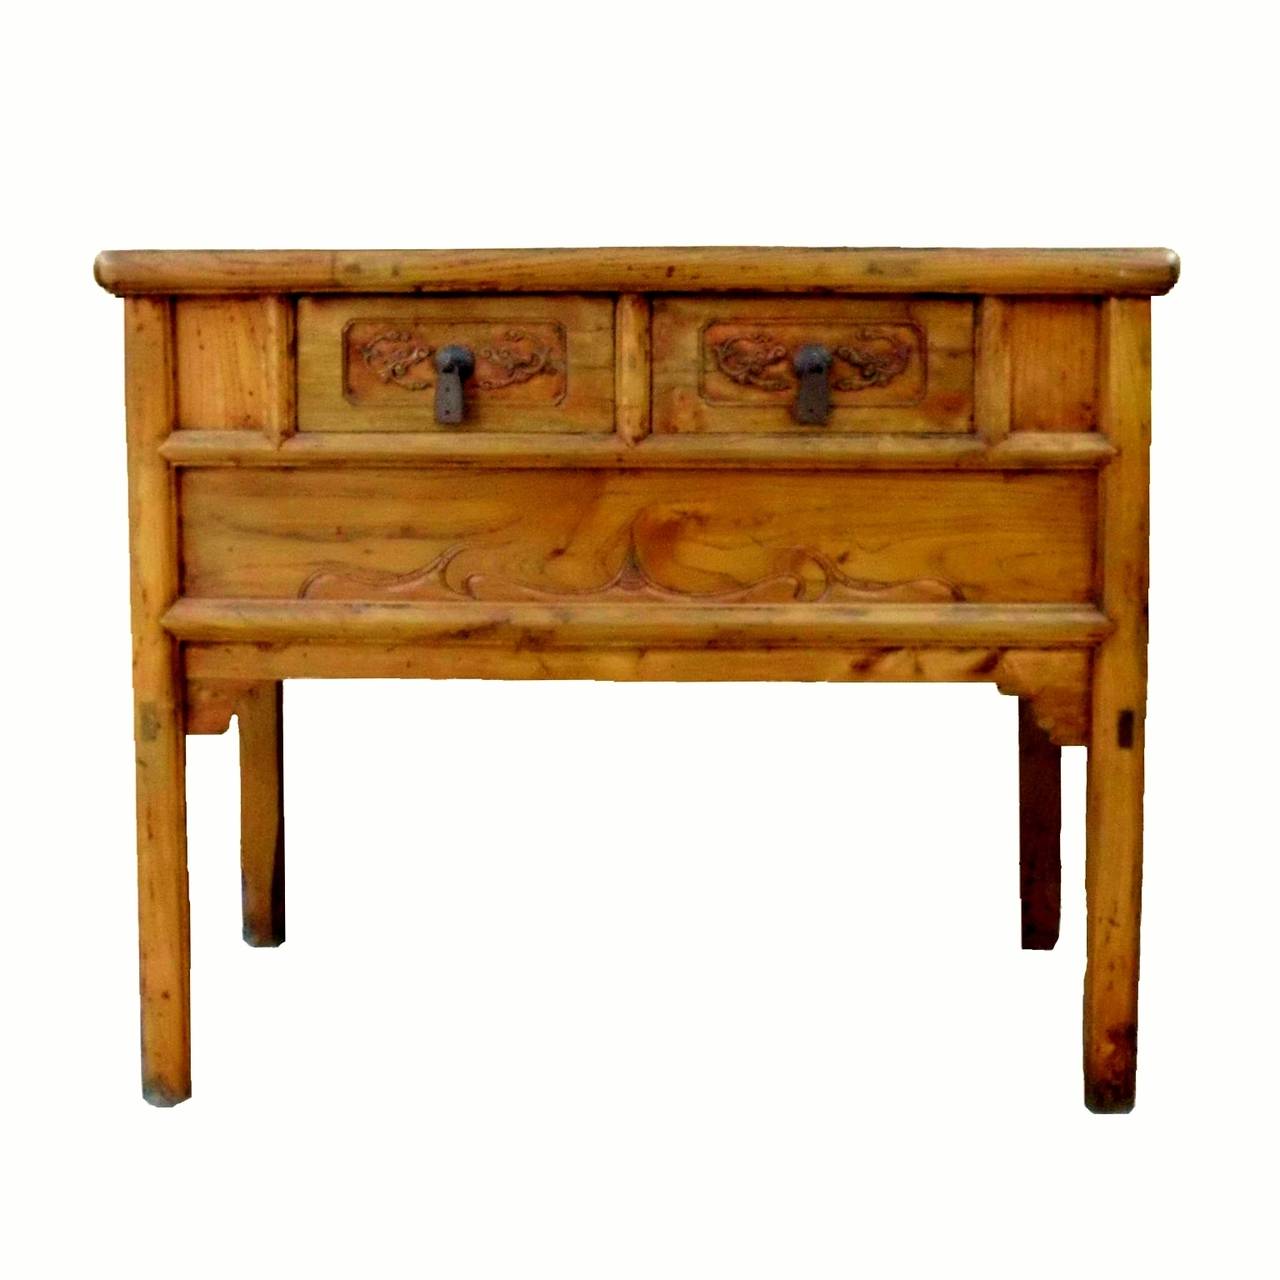 Elmwood with beautiful grains such as the ones on this table are prized in the 19th century furniture making. This natural color table features two drawers carved with the dragon motif. Secret compartment under the drawer is original to the piece.